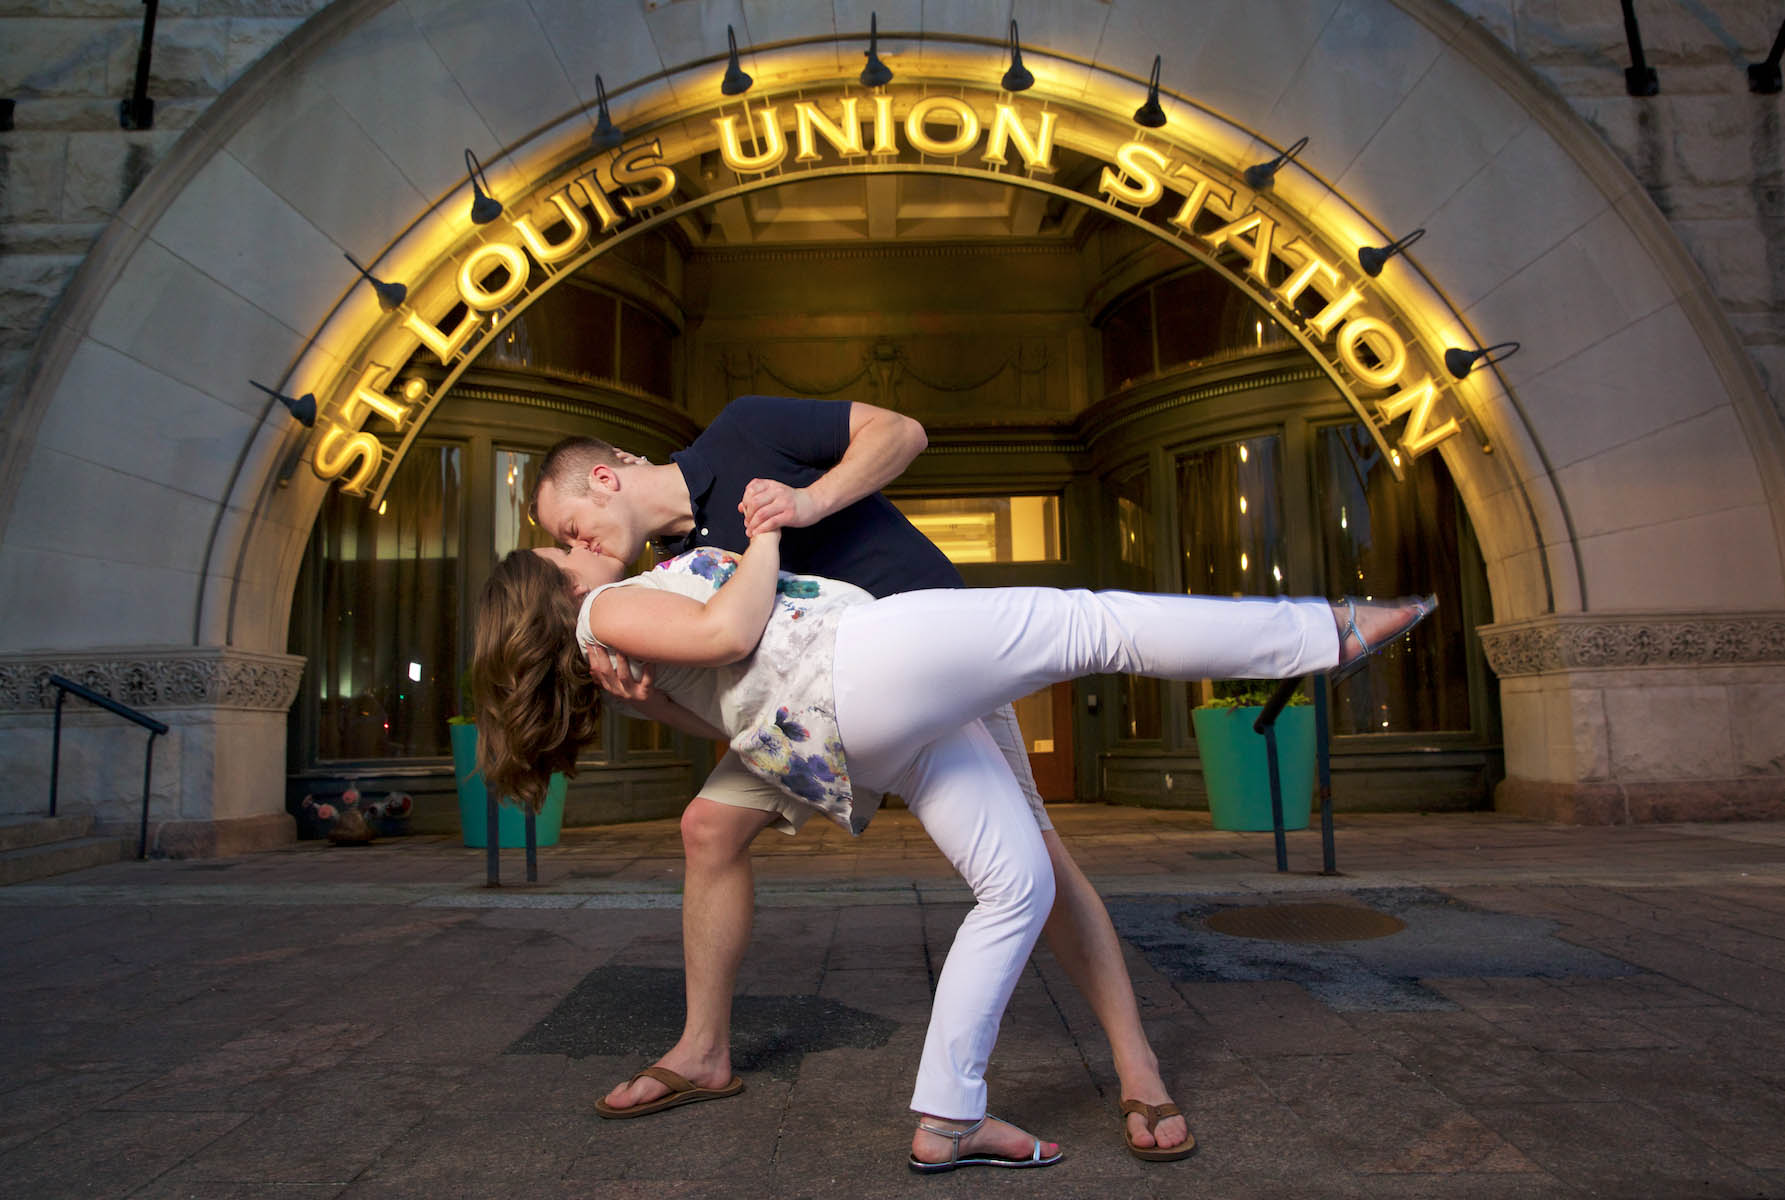 Union Station — St. Louis engagement session for Alissa & Ben. Wedding photography by Tiffany & Steve Warmowski.